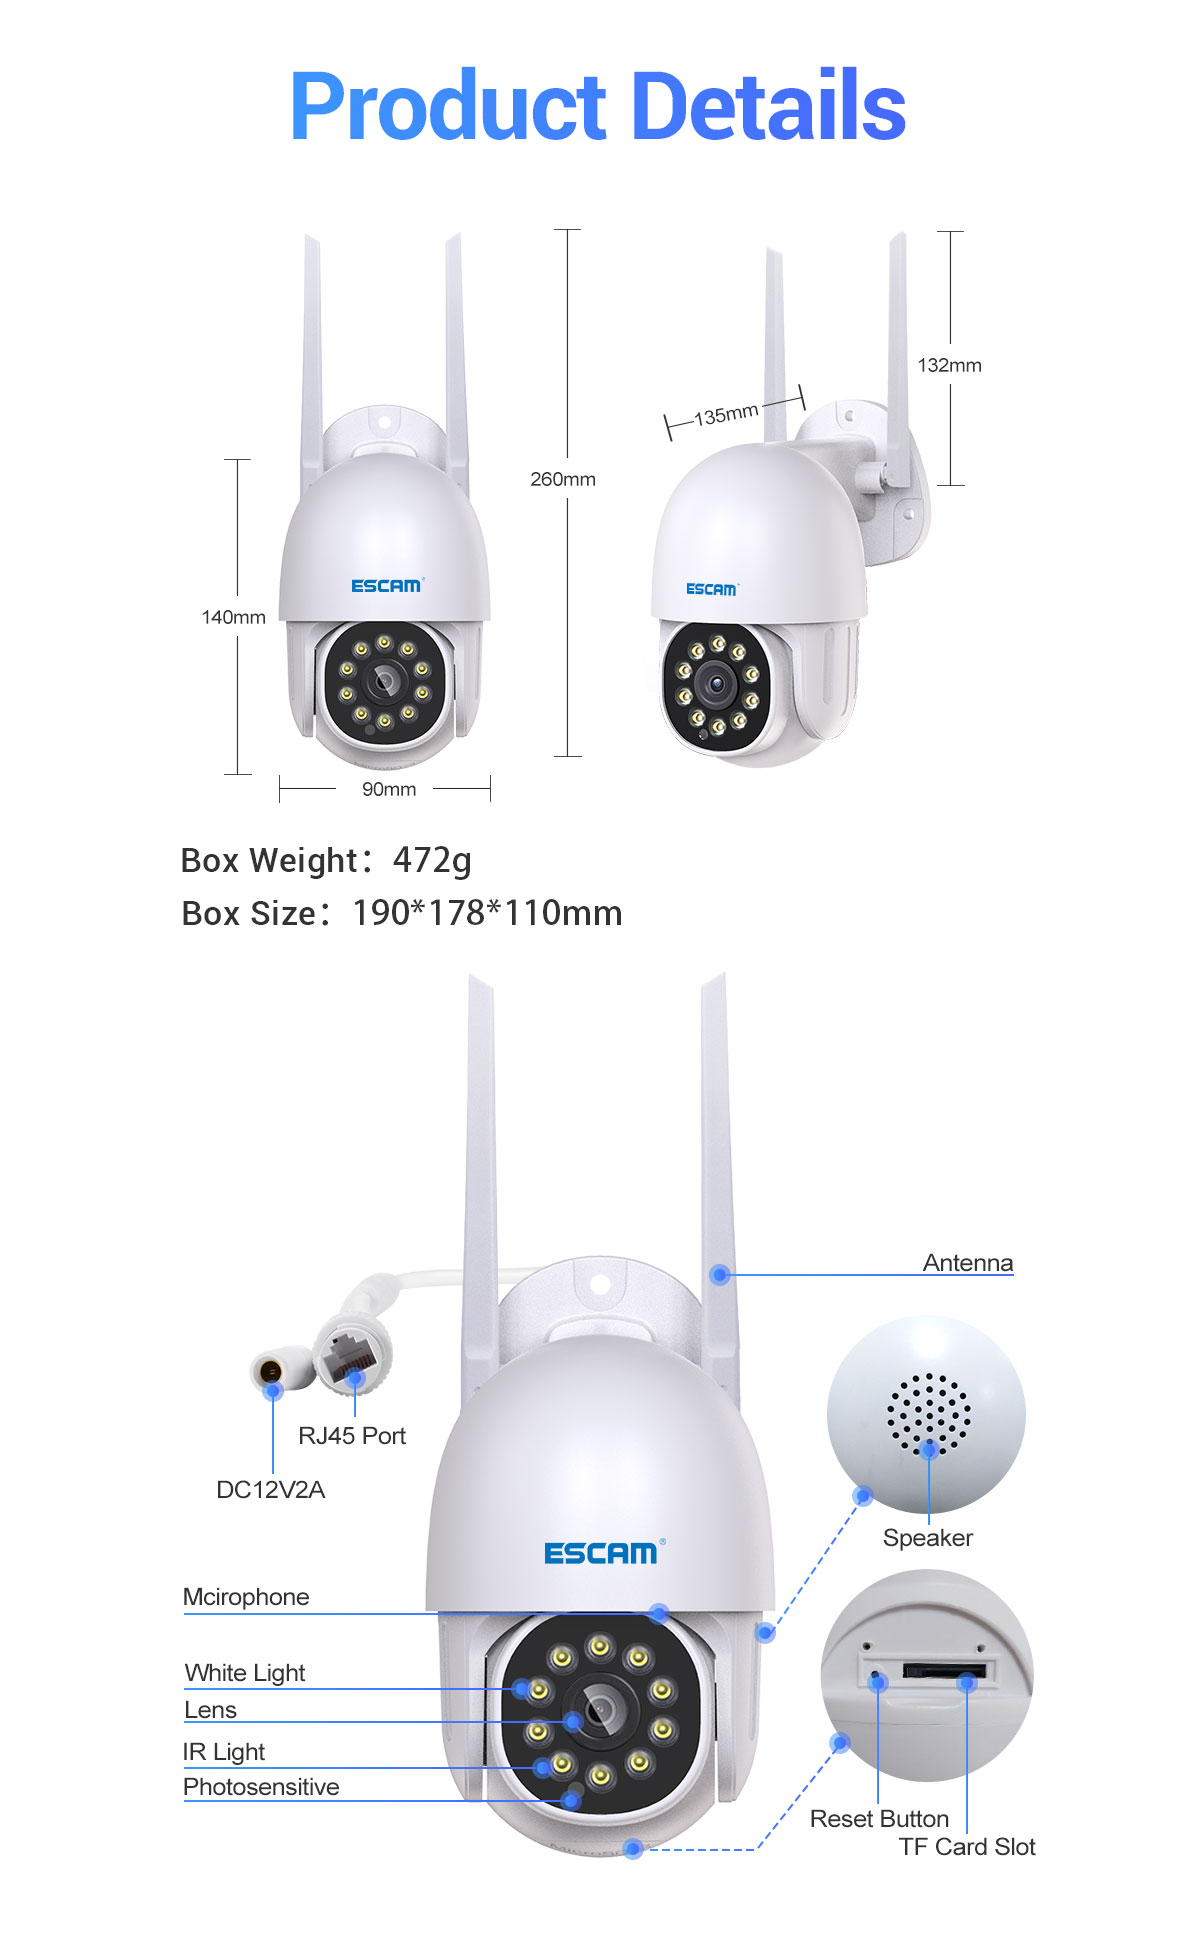 ESCAM-PT202-1080P-WiFi-IP-Camera-Infrared-Night-Vision-Waterproof-With-Motions-Detection-And-Automat-1784296-10